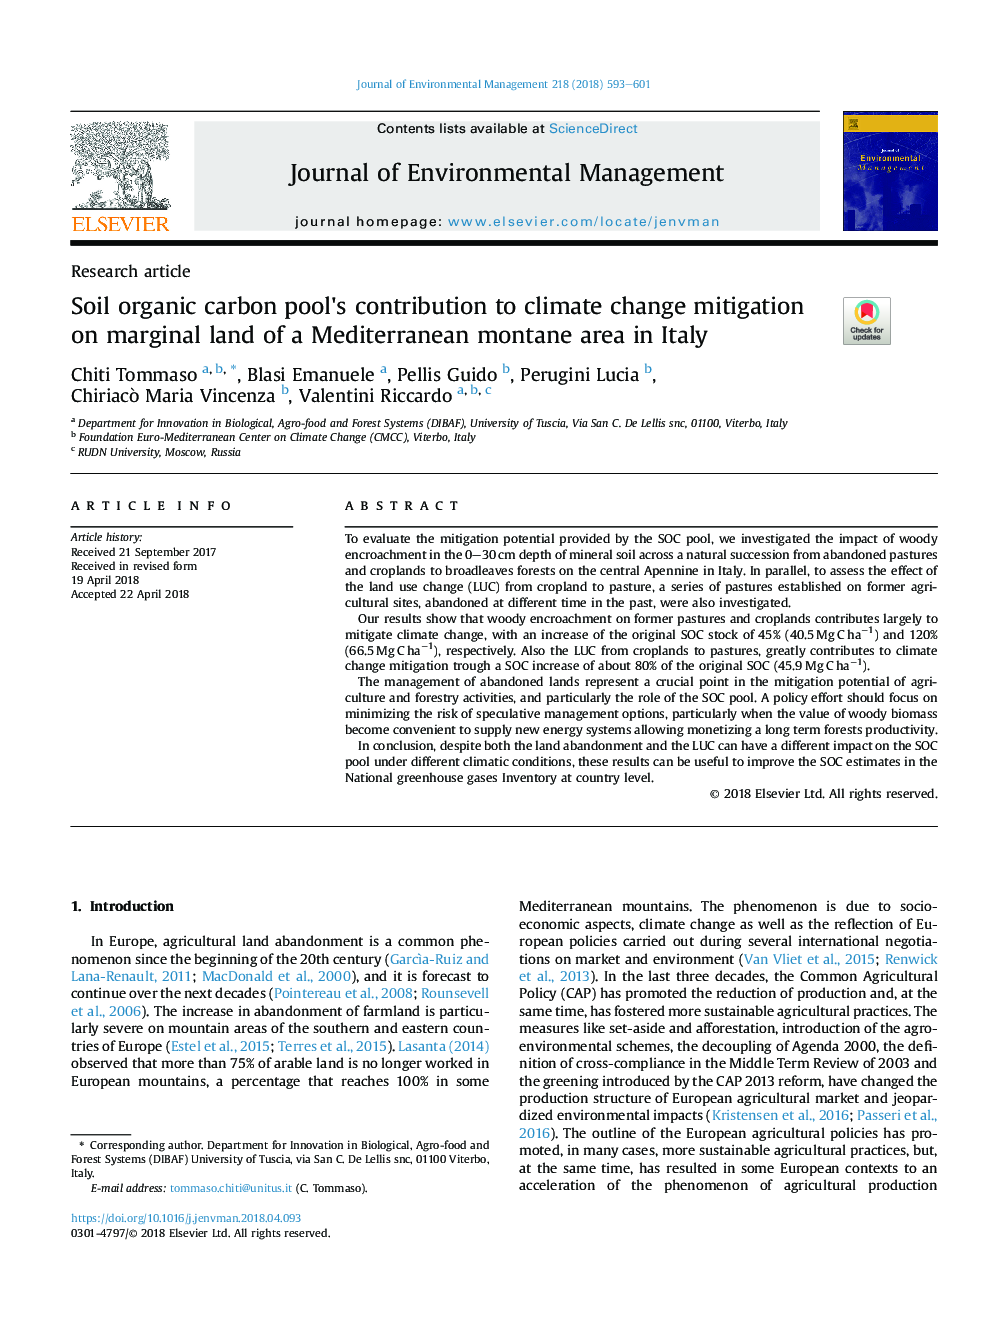 Soil organic carbon pool's contribution to climate change mitigation on marginal land of a Mediterranean montane area in Italy